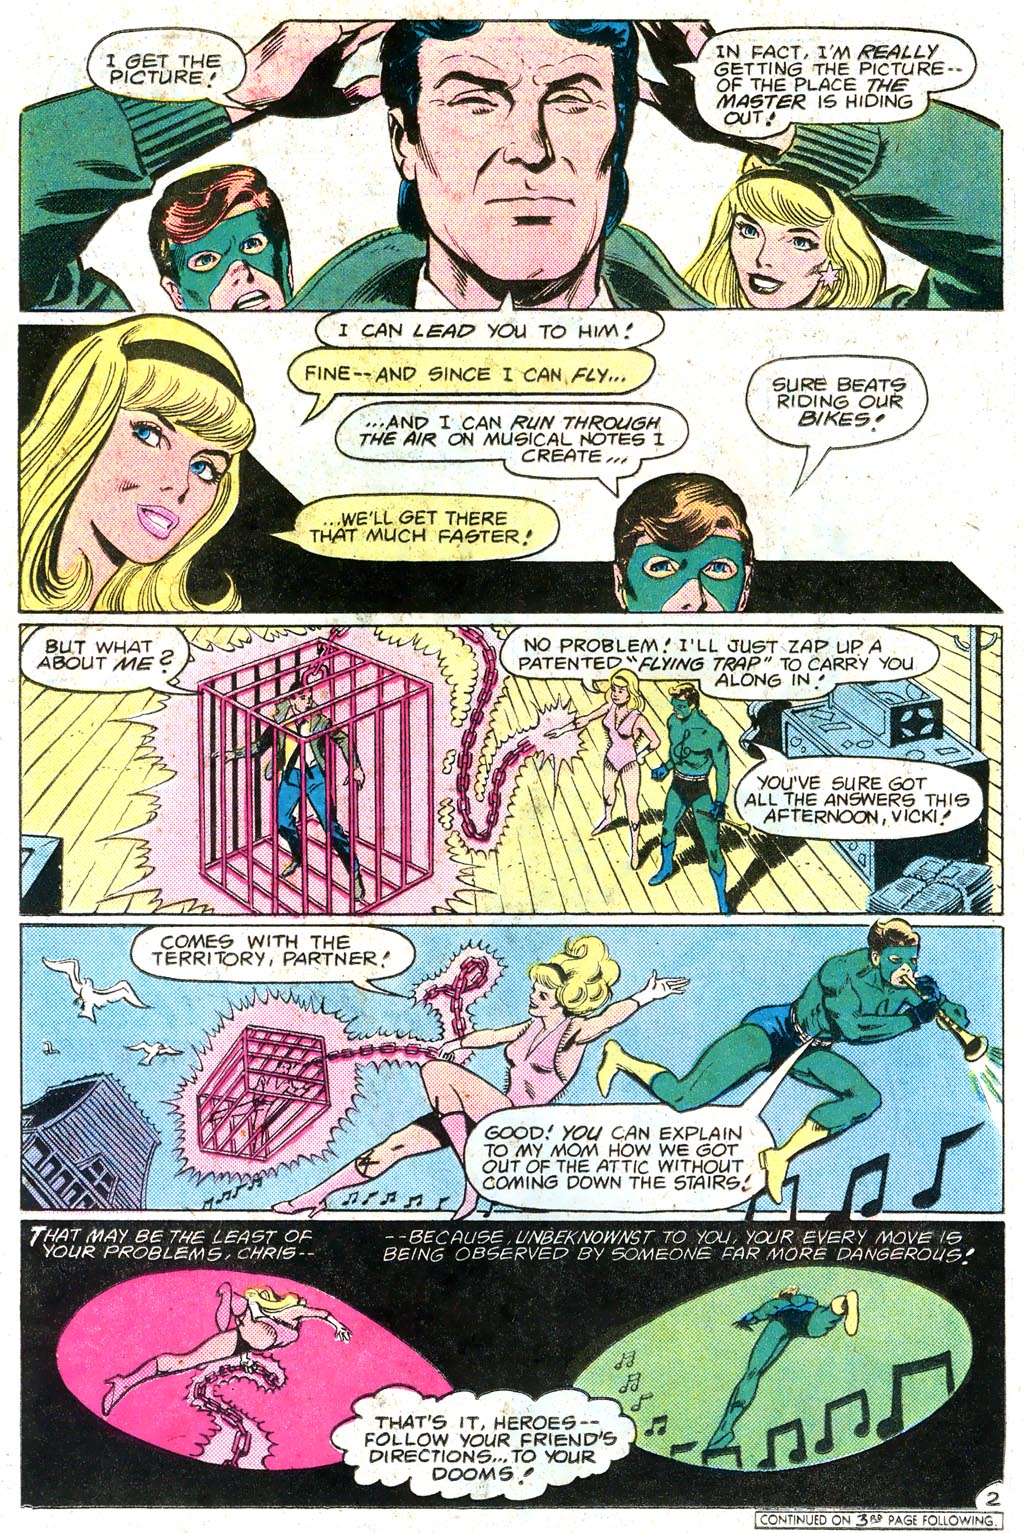 The New Adventures of Superboy 46 Page 21